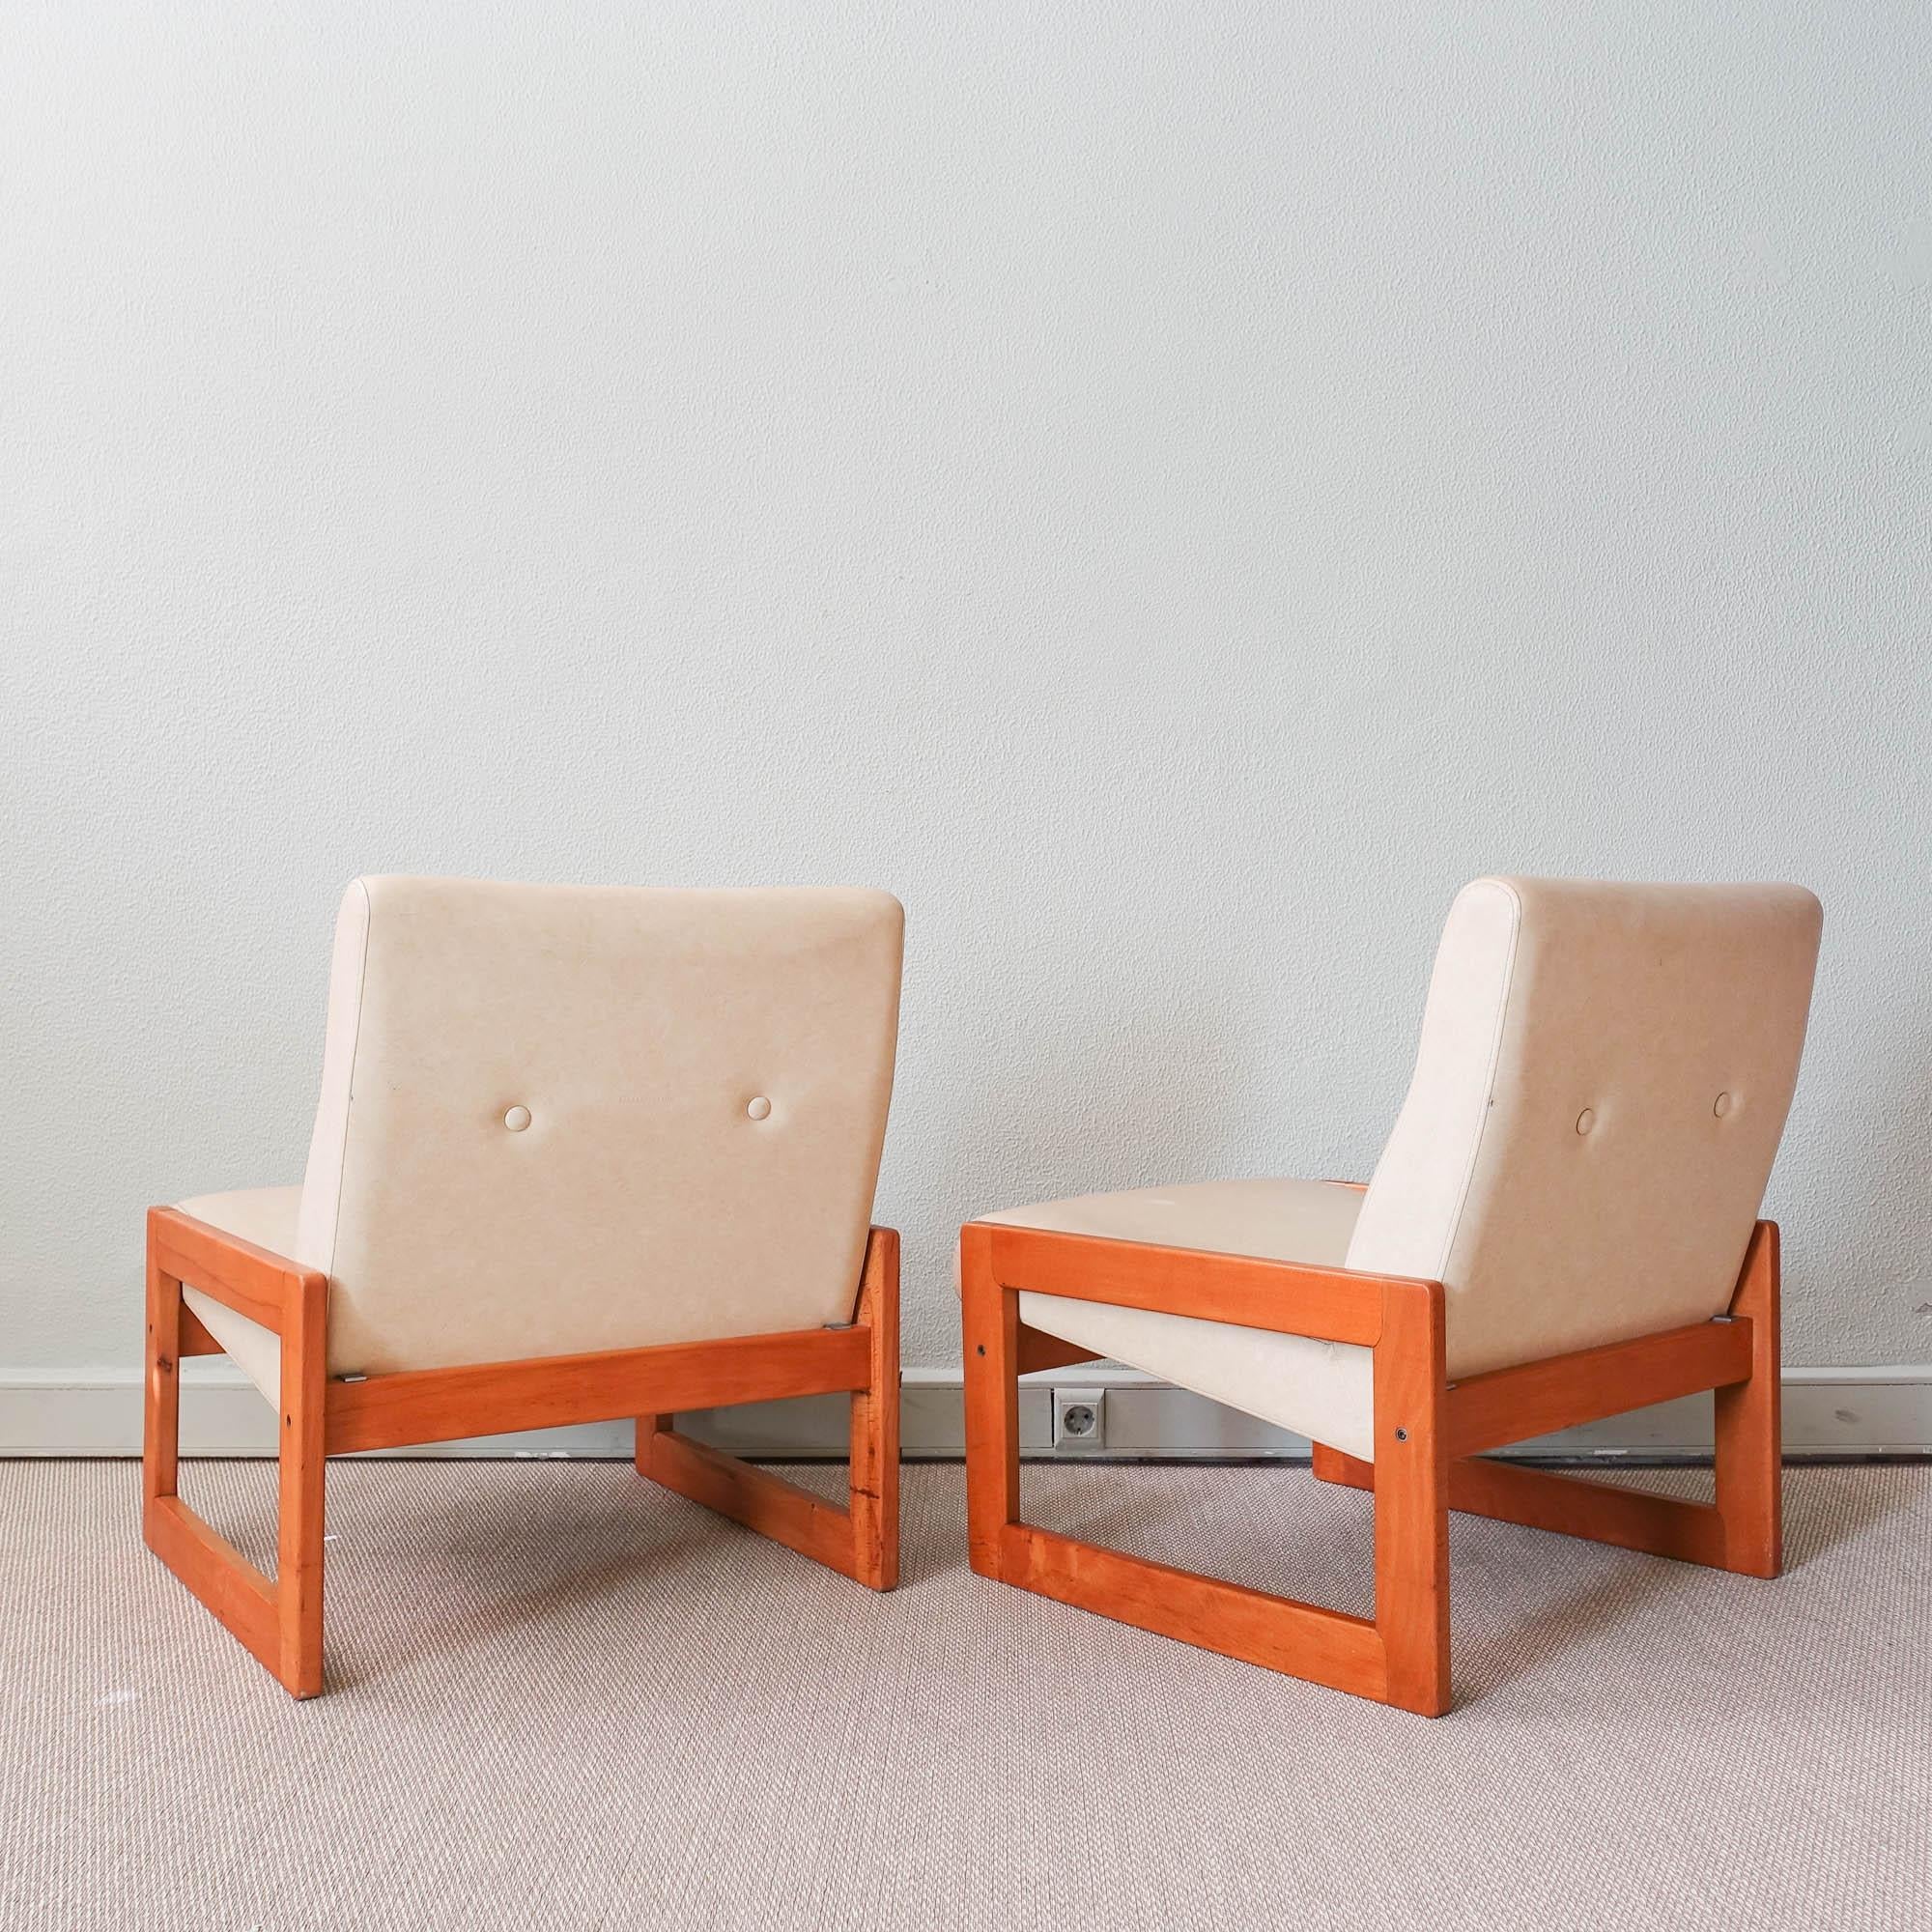 Portuguese Pair of Easy Chairs, Model Espinho, by José Espinho for Olaio, 1973 For Sale